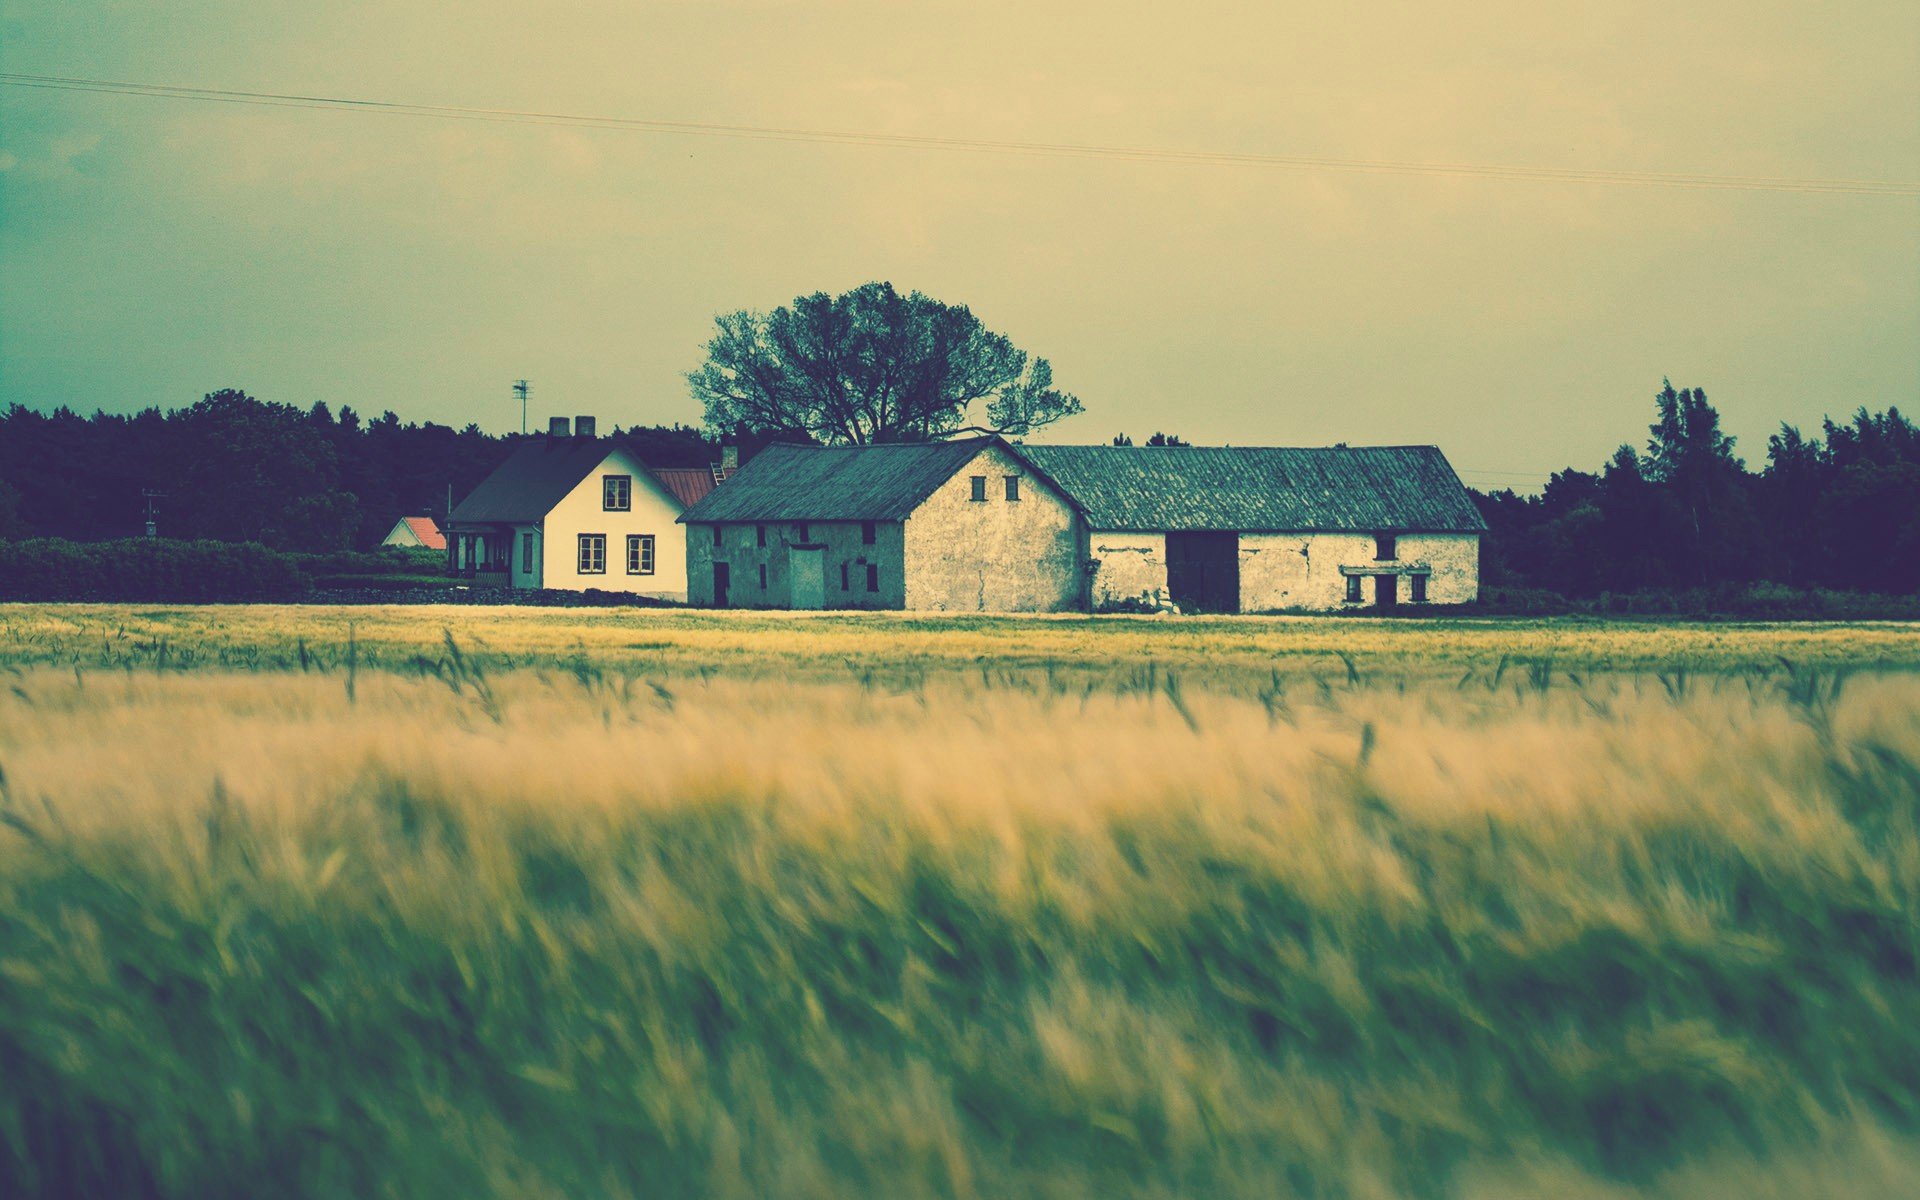 farmhouse wallpapers, photos and desktop backgrounds up to 8K 7680x4320 resolution